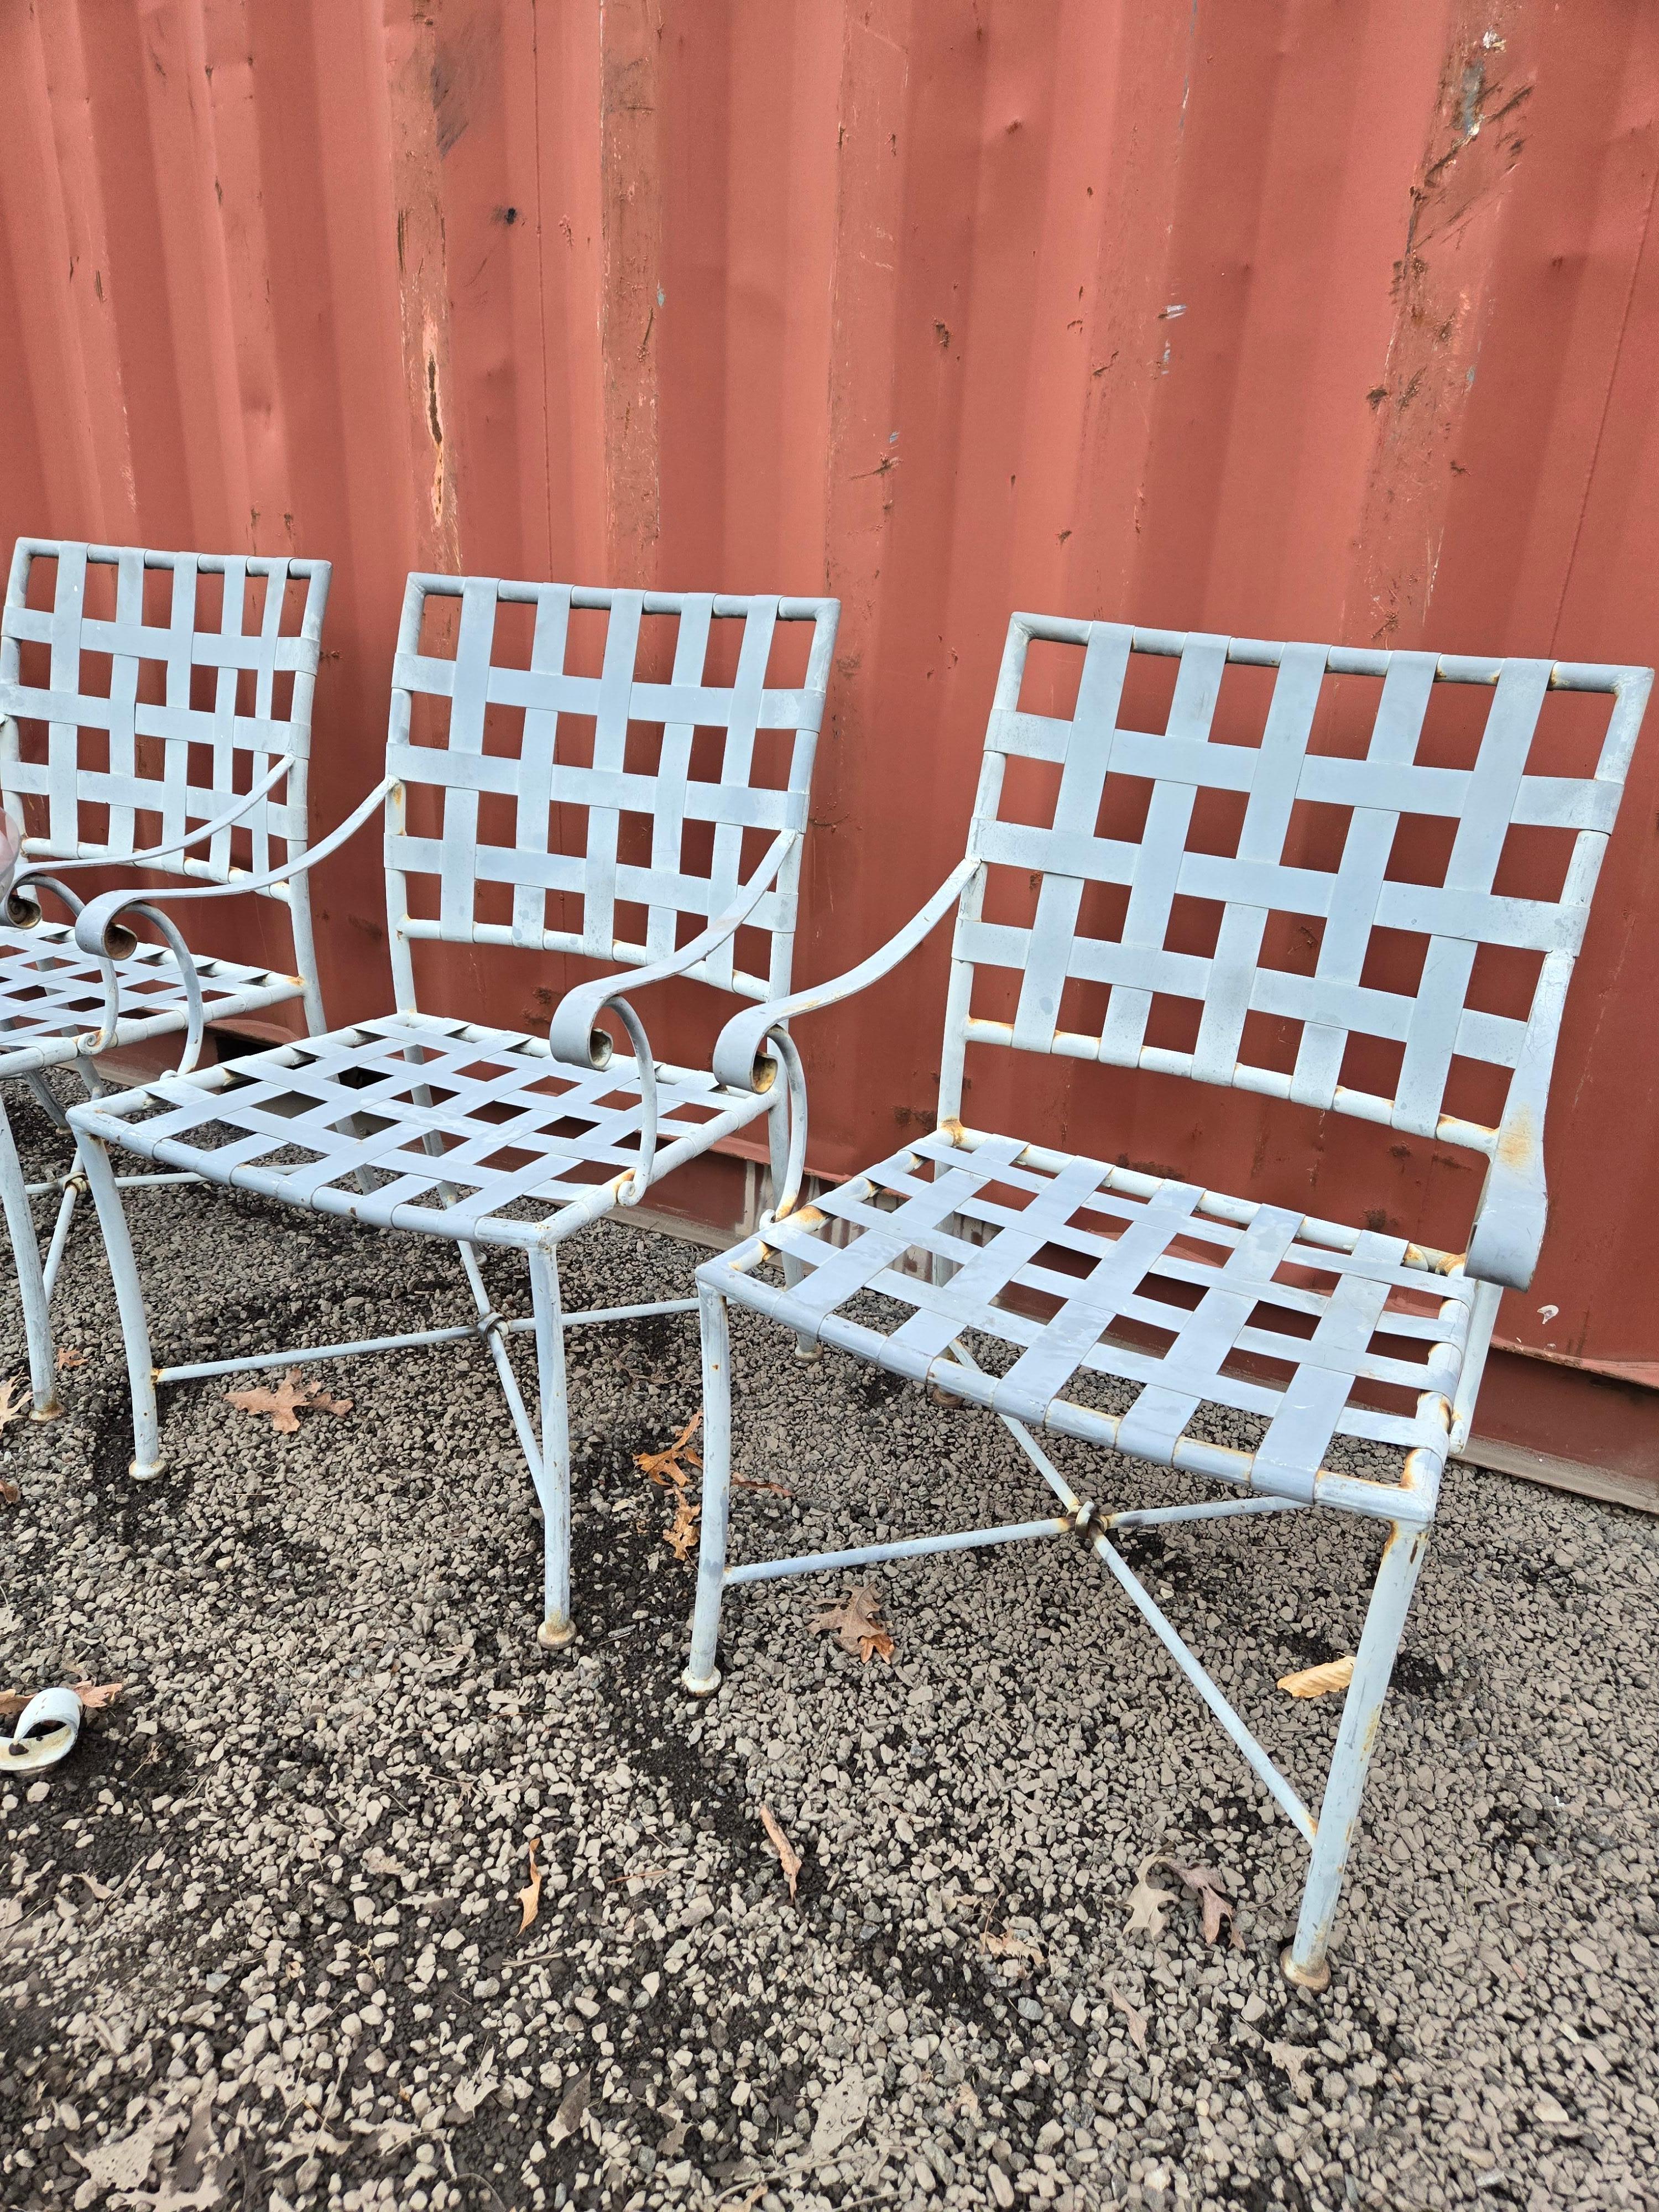 Mid-20th Century Vintage Wrought Iron Outdoor Dining Set For Sale